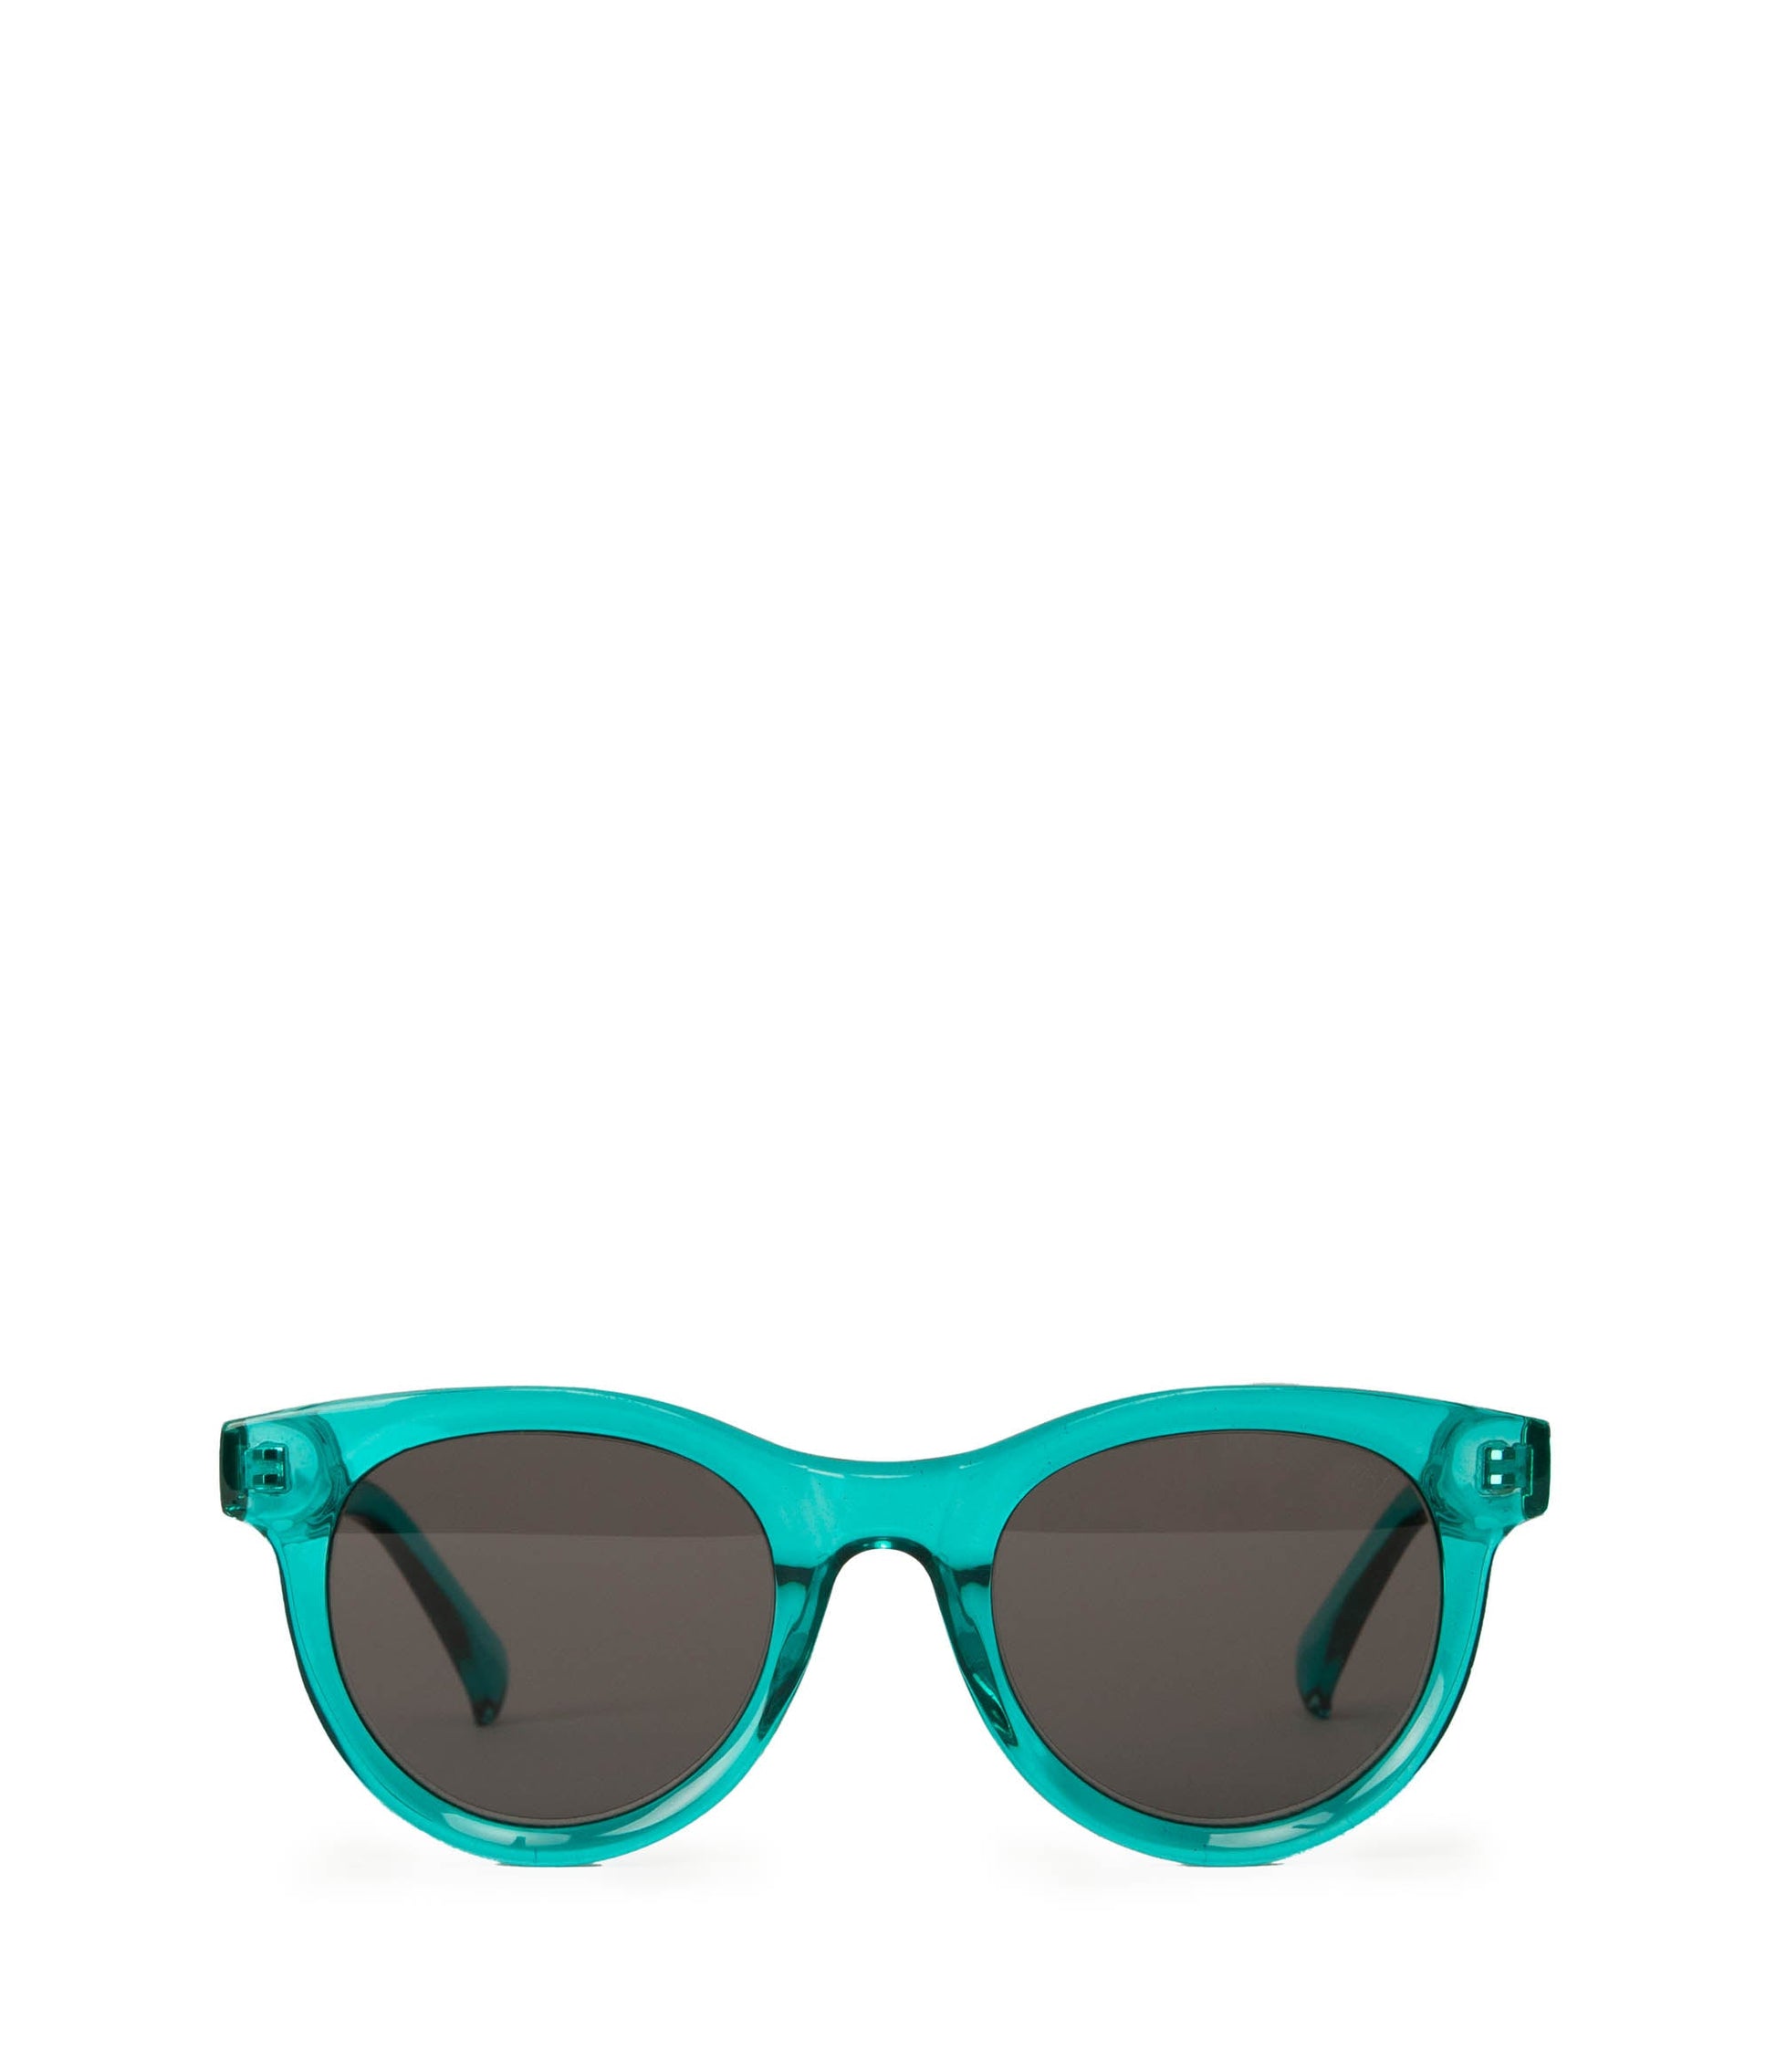 JAZI-2 Recycled Round Sunglasses | Color: Green, Grey - variant::teal